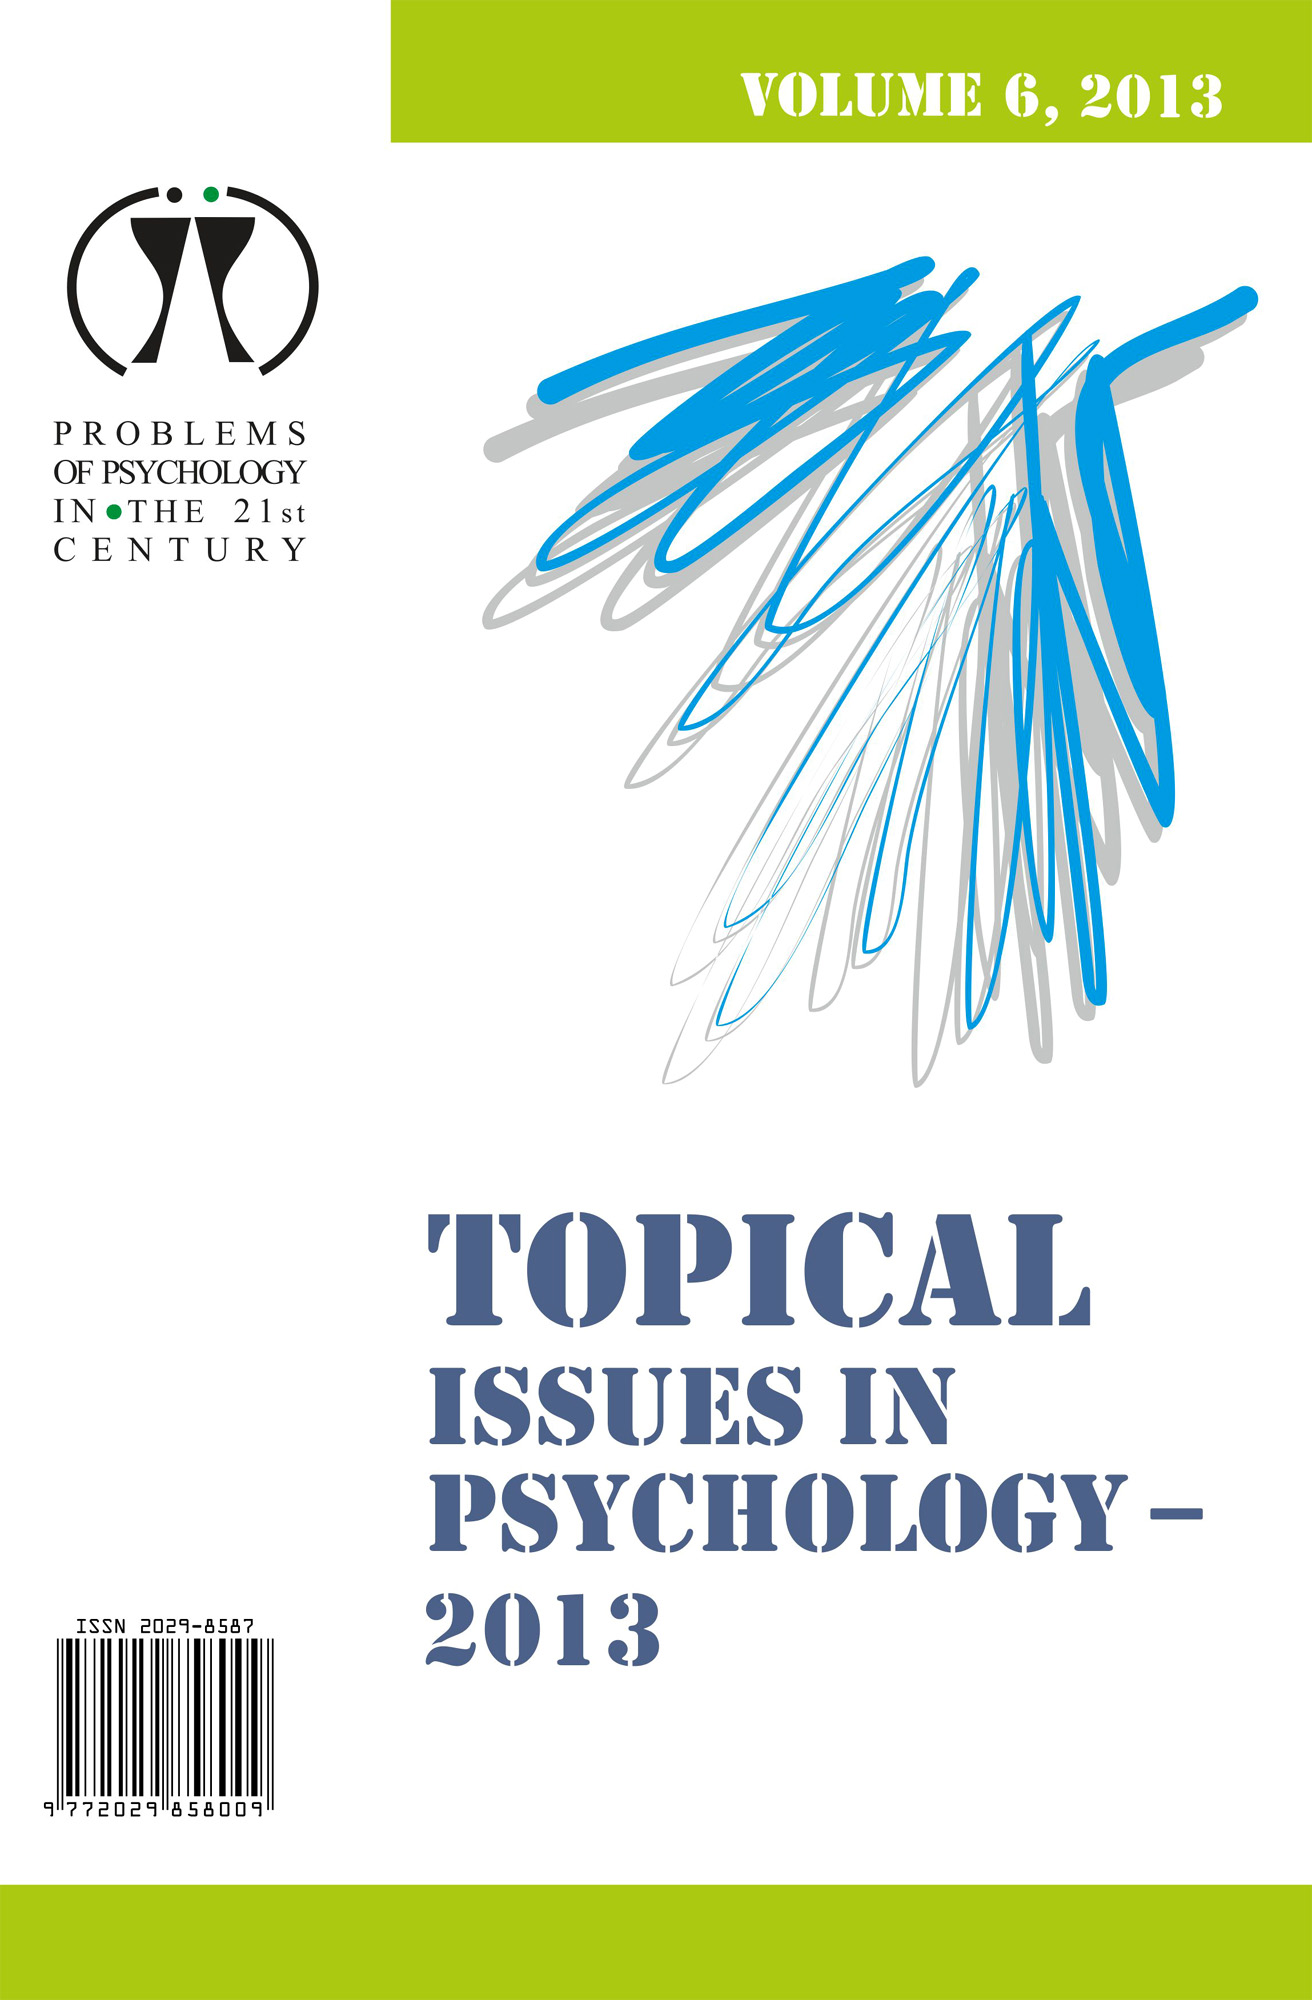 DYNAMIC SYSTEM APPROACH IN PSYCHOLOGY: PROPOSITION AND APPLICATION IN THE STUDY OF EMOTION, APPRAISAL AND COGNITIVE ACHIEVEMENT Cover Image